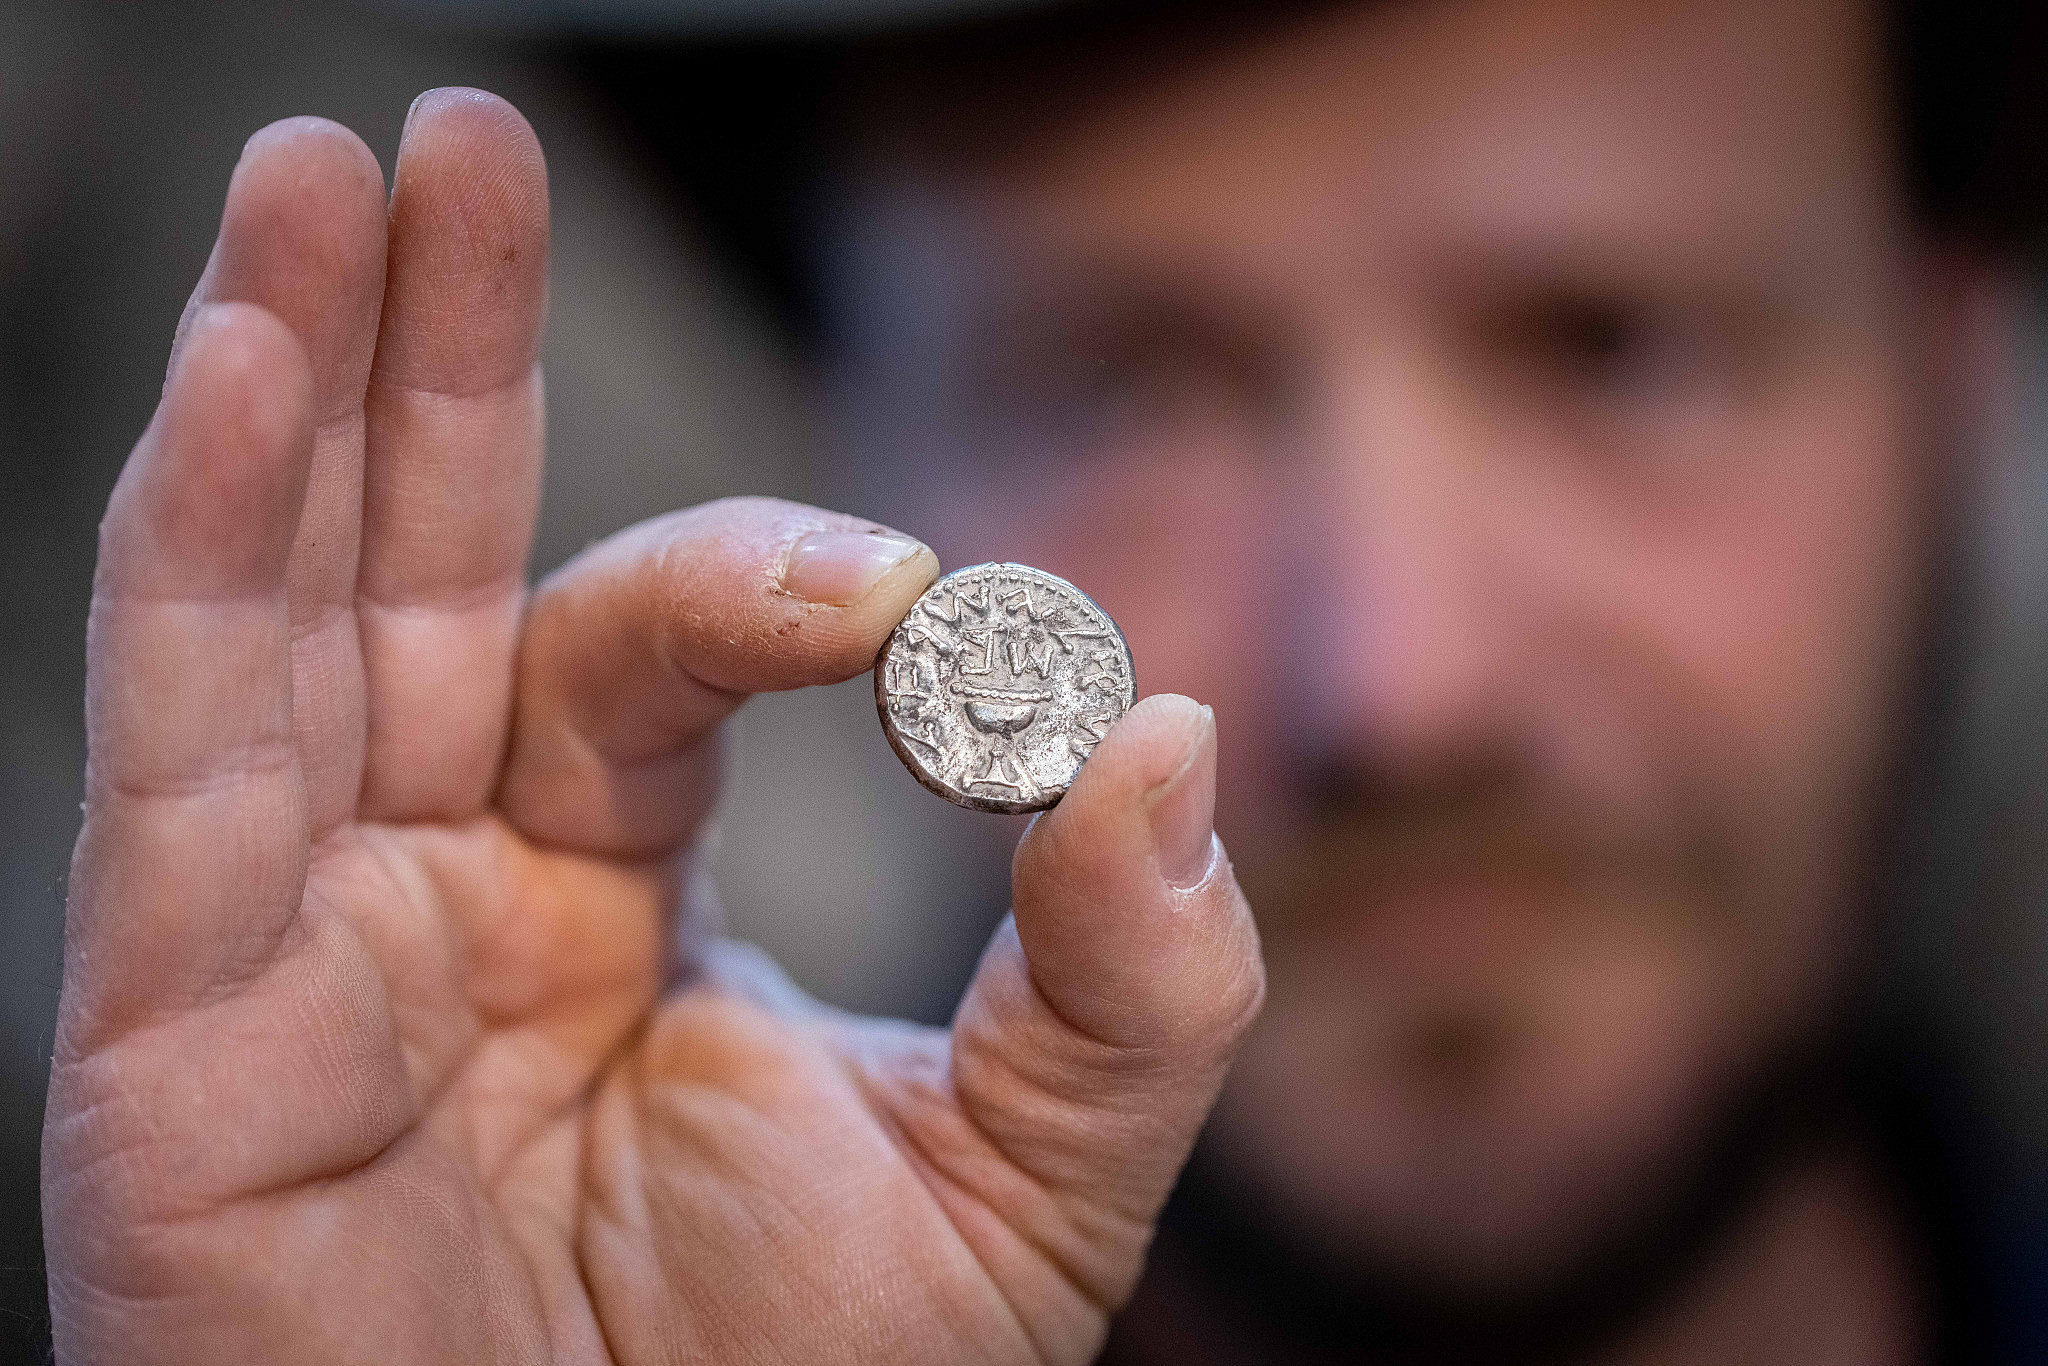 Archaeologist of the Israel Antiquities Authority (IAA) Ari Levi holds a rare 2,000-year-old silver coin at the Pilgrimage Road at the City of David, in the East Jerusalem neighborhood of Silwan, November 23, 2021. (Yonatan Sindel/Flash90)